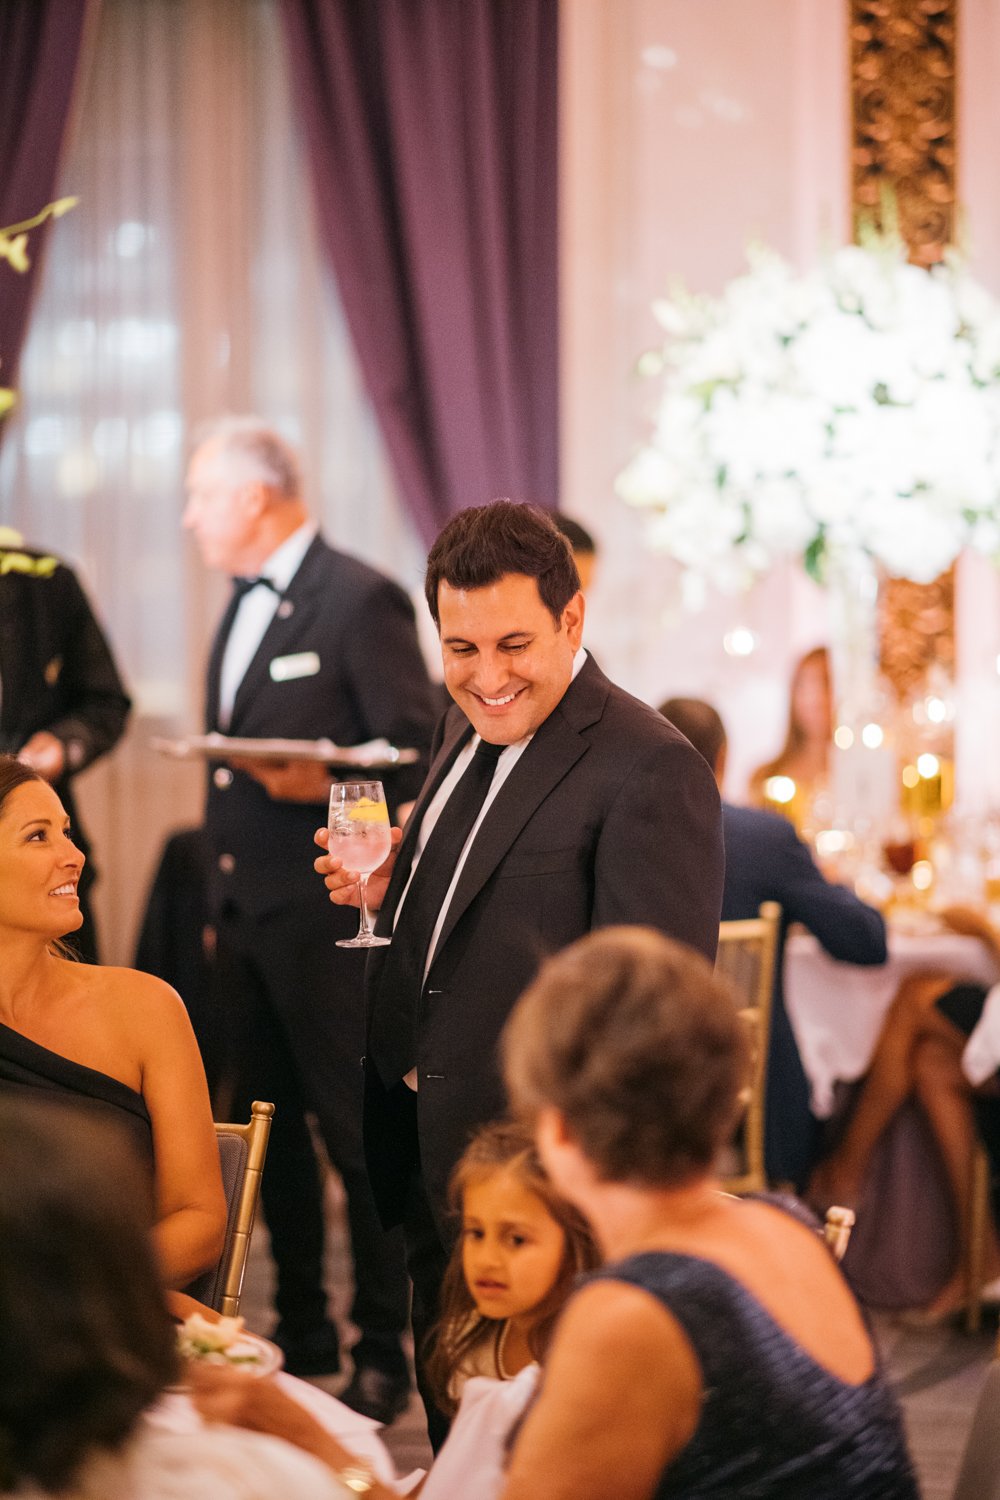 Groom stands next to a table at wedding reception and looks down at the wedding guests seated at the table.

Manhattan Luxury Wedding. New York Luxury Wedding Photographer. Wedding in Manhattan. NYC Luxury Wedding.